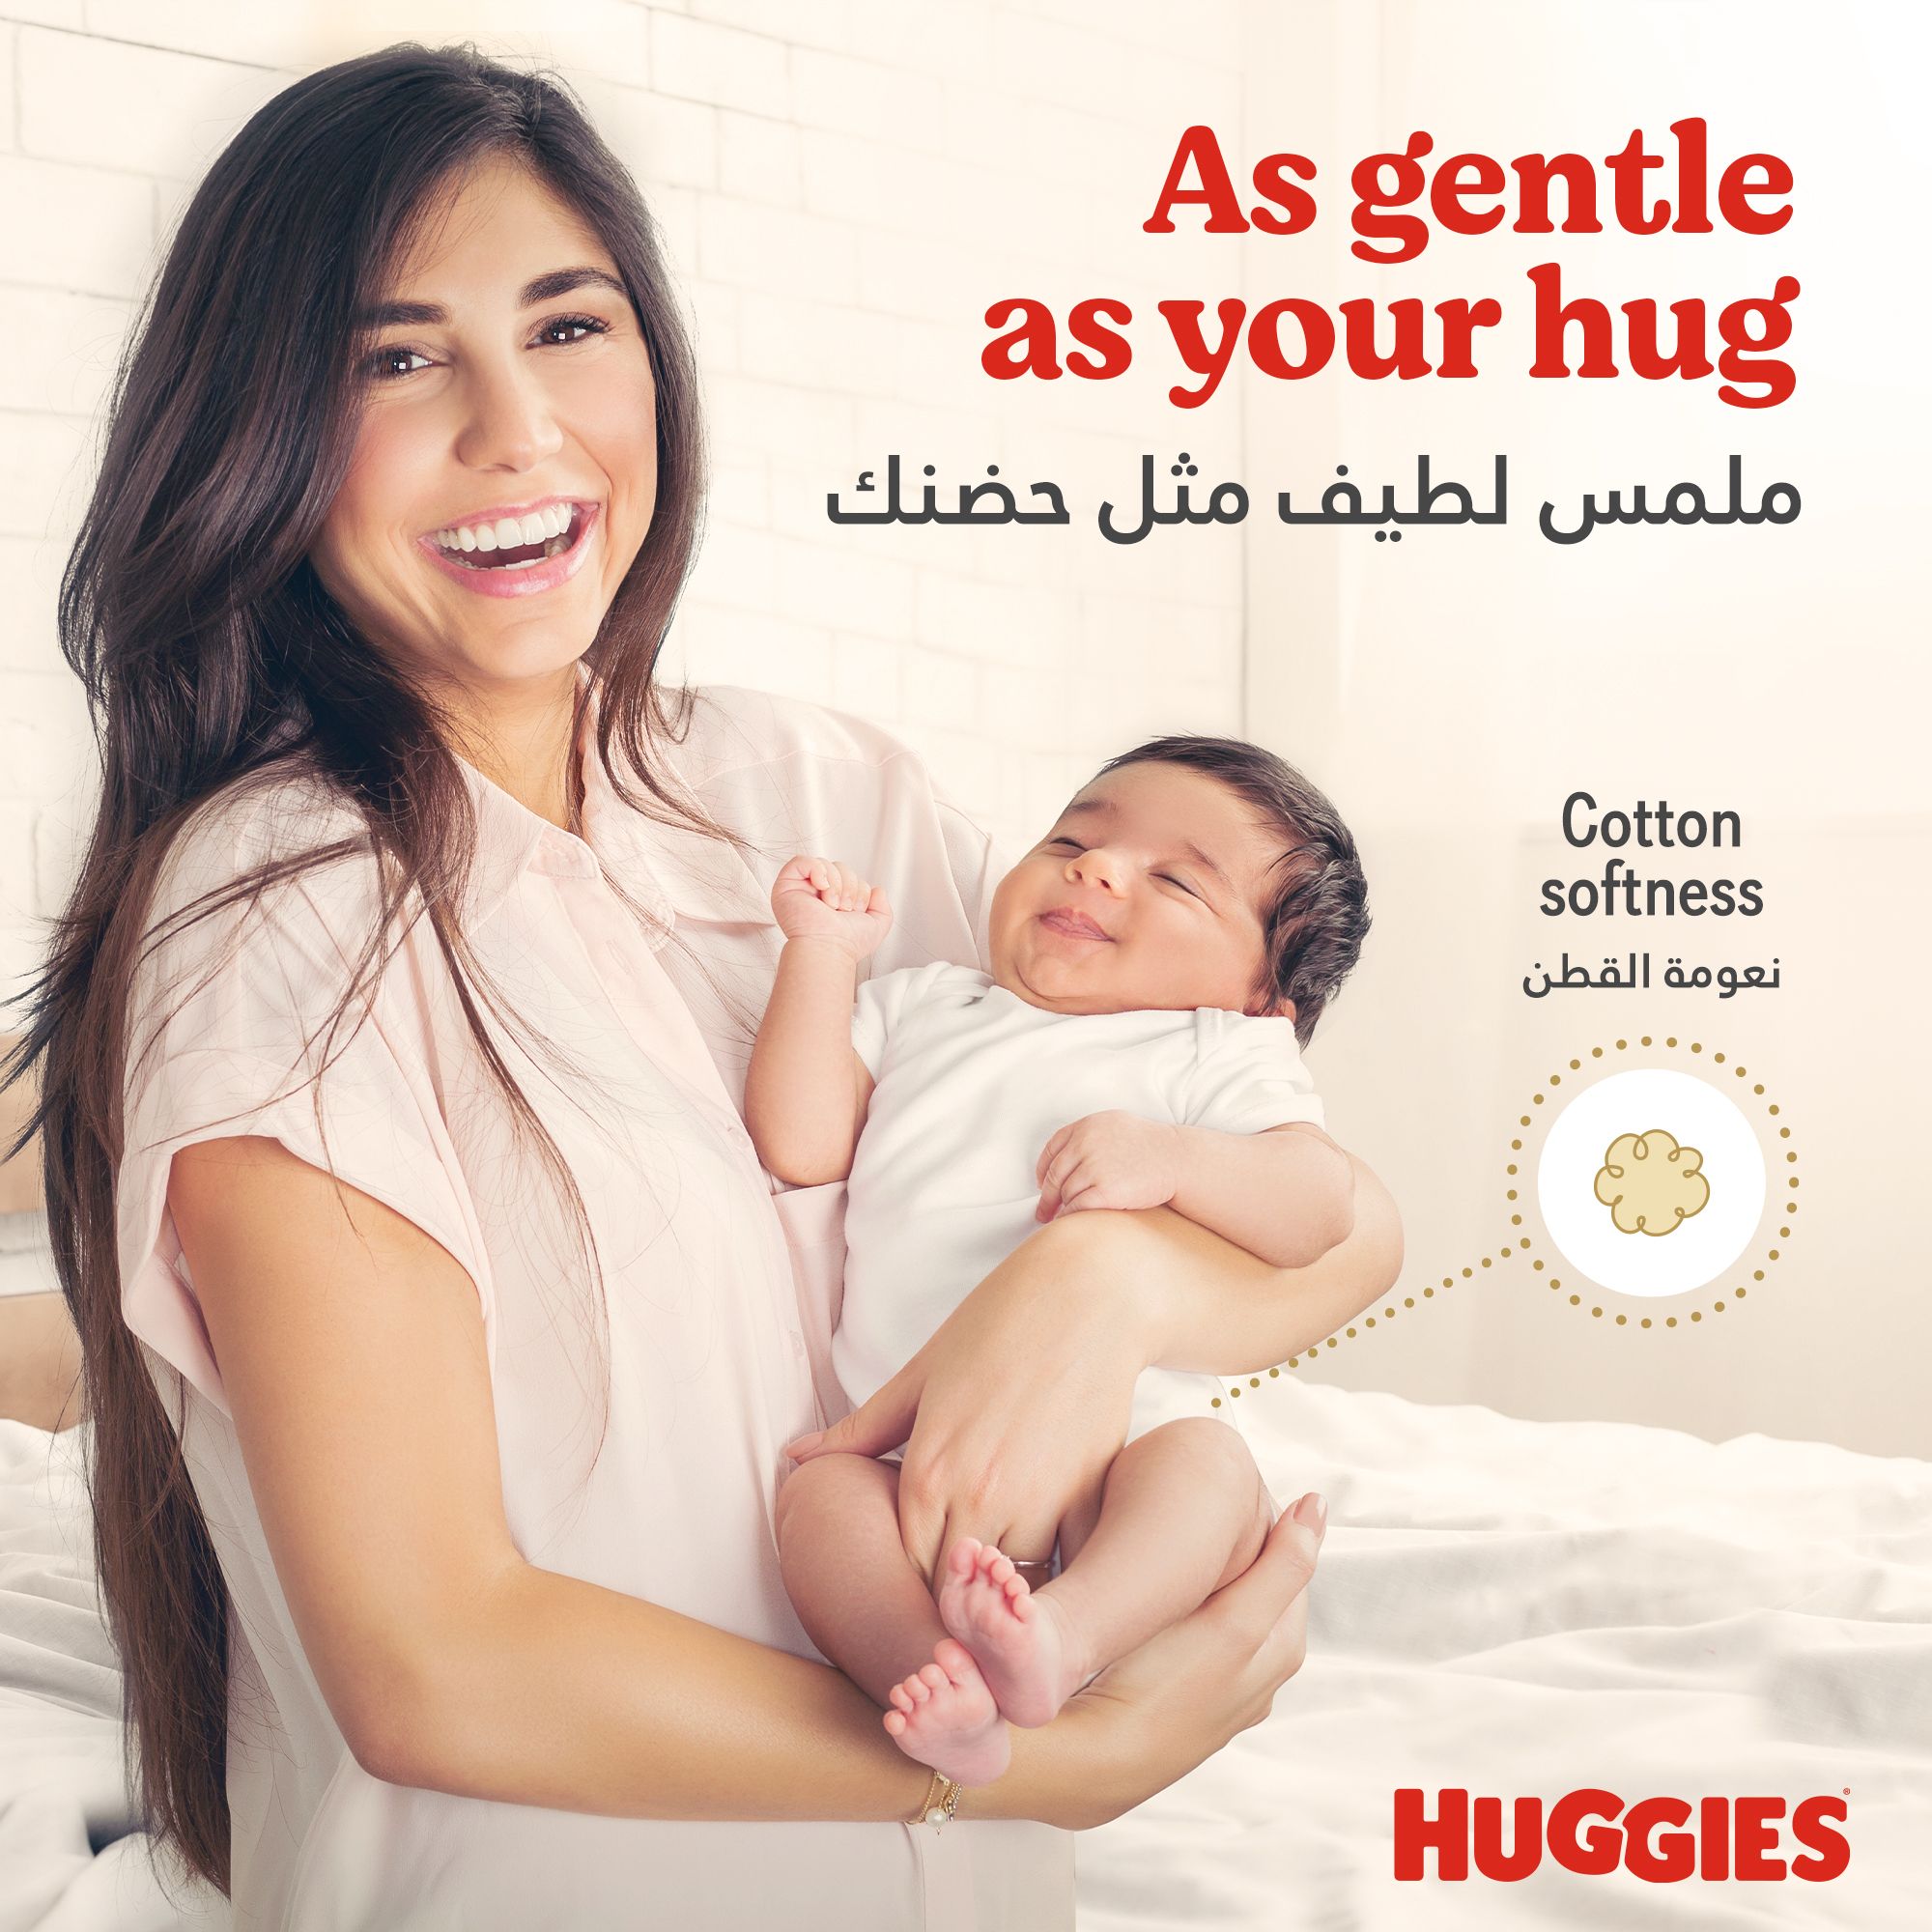 Huggies Extra Care, Size 4+, 10 -16 kg, Jumbo Pack, 64 Diapers